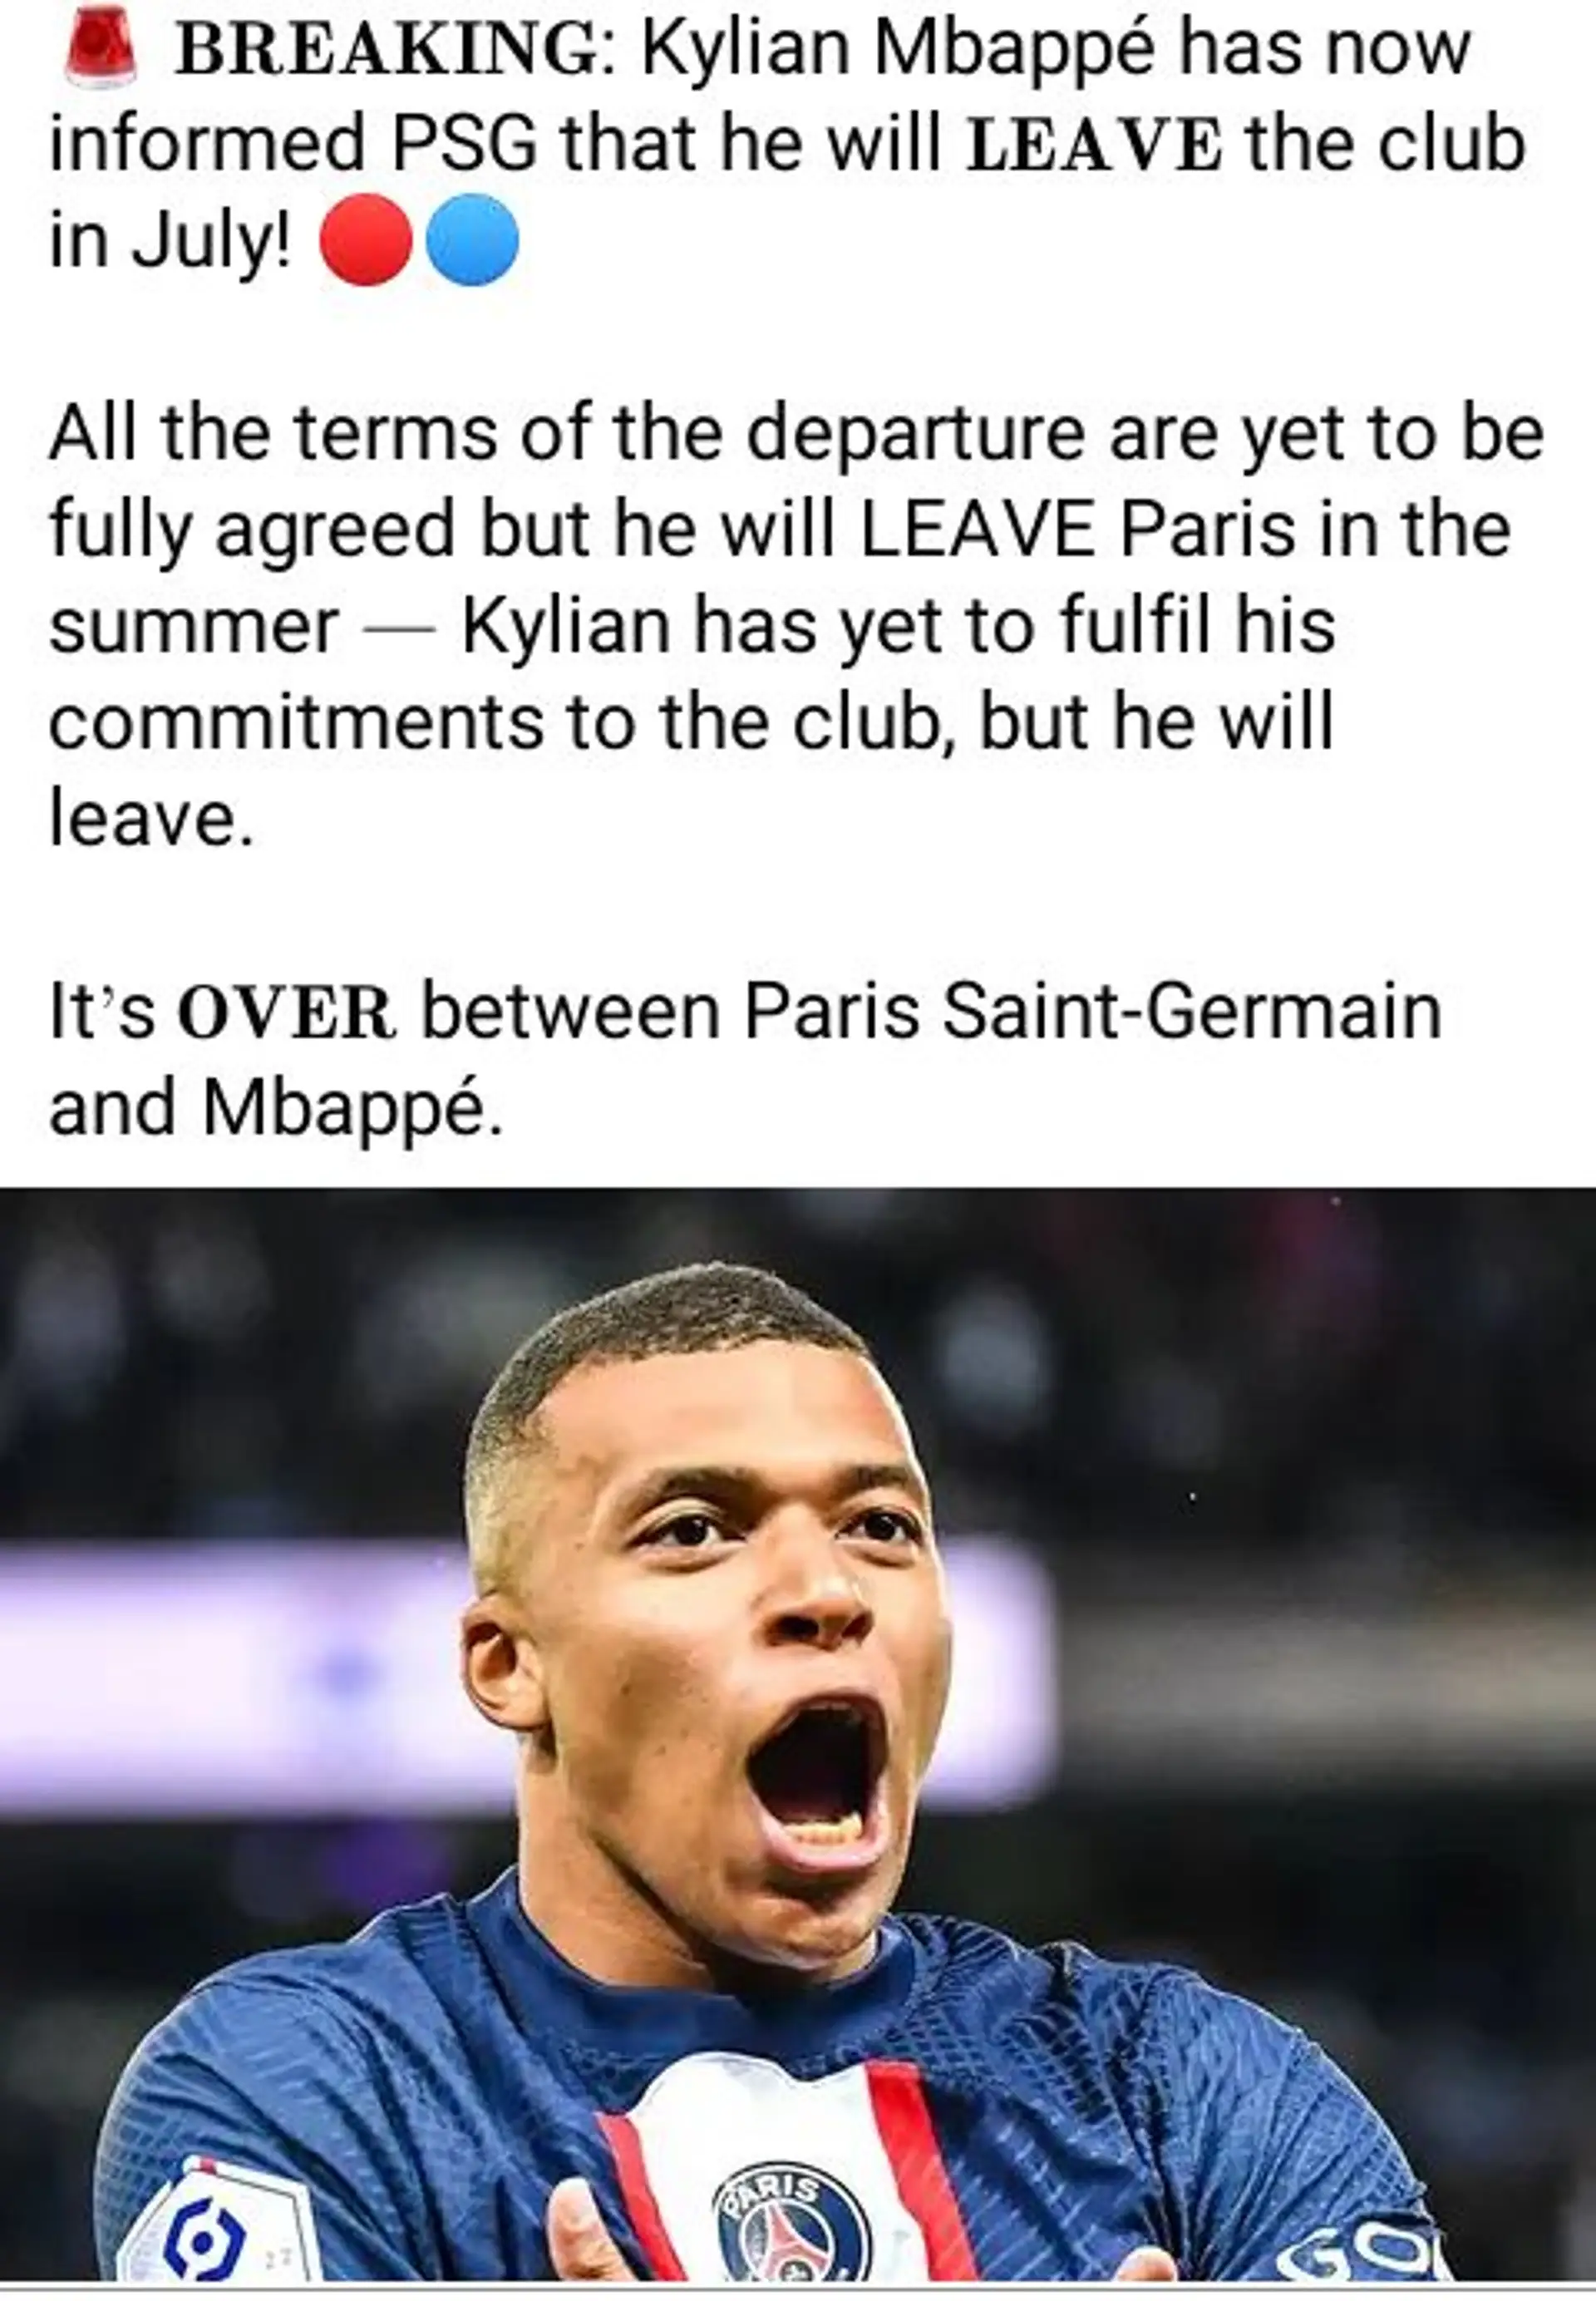 Kylian mbappé is finally living PSG. which club do you think he will 